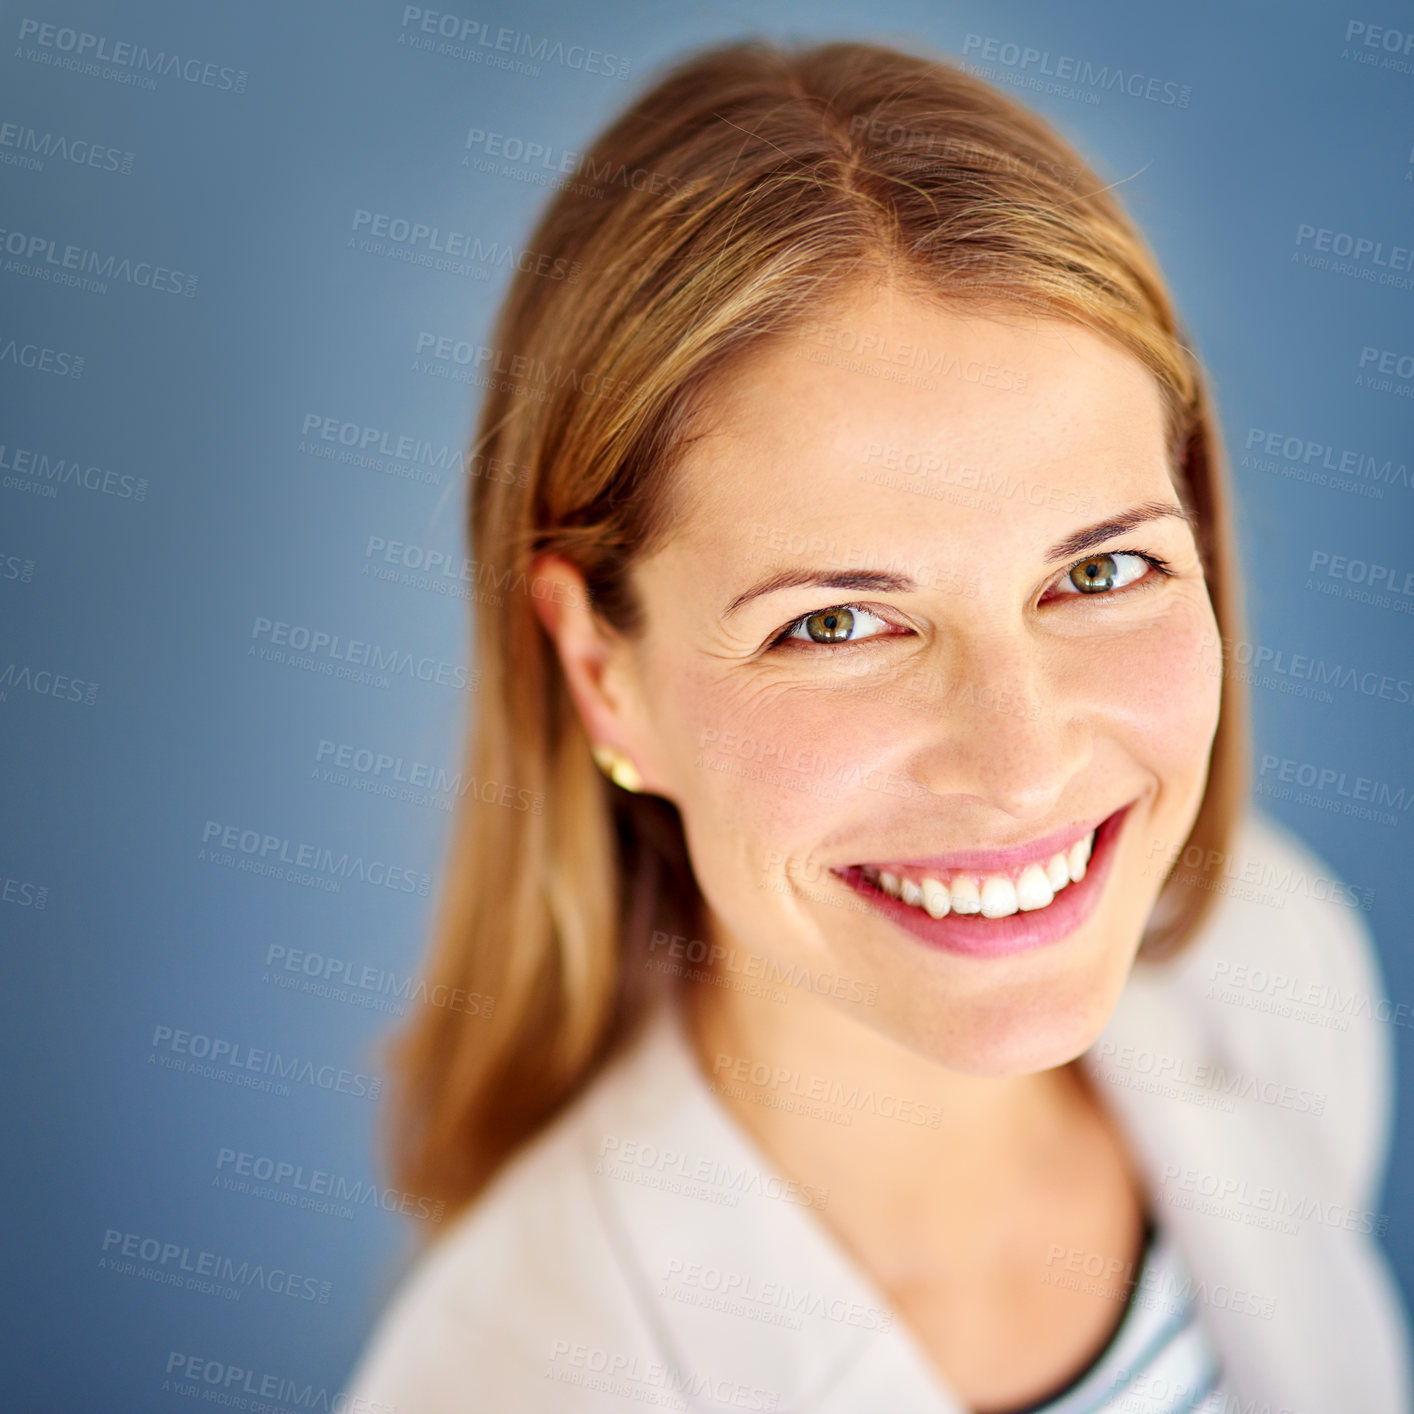 Buy stock photo Shot of a woman dressed in office-wear posing against a blue background